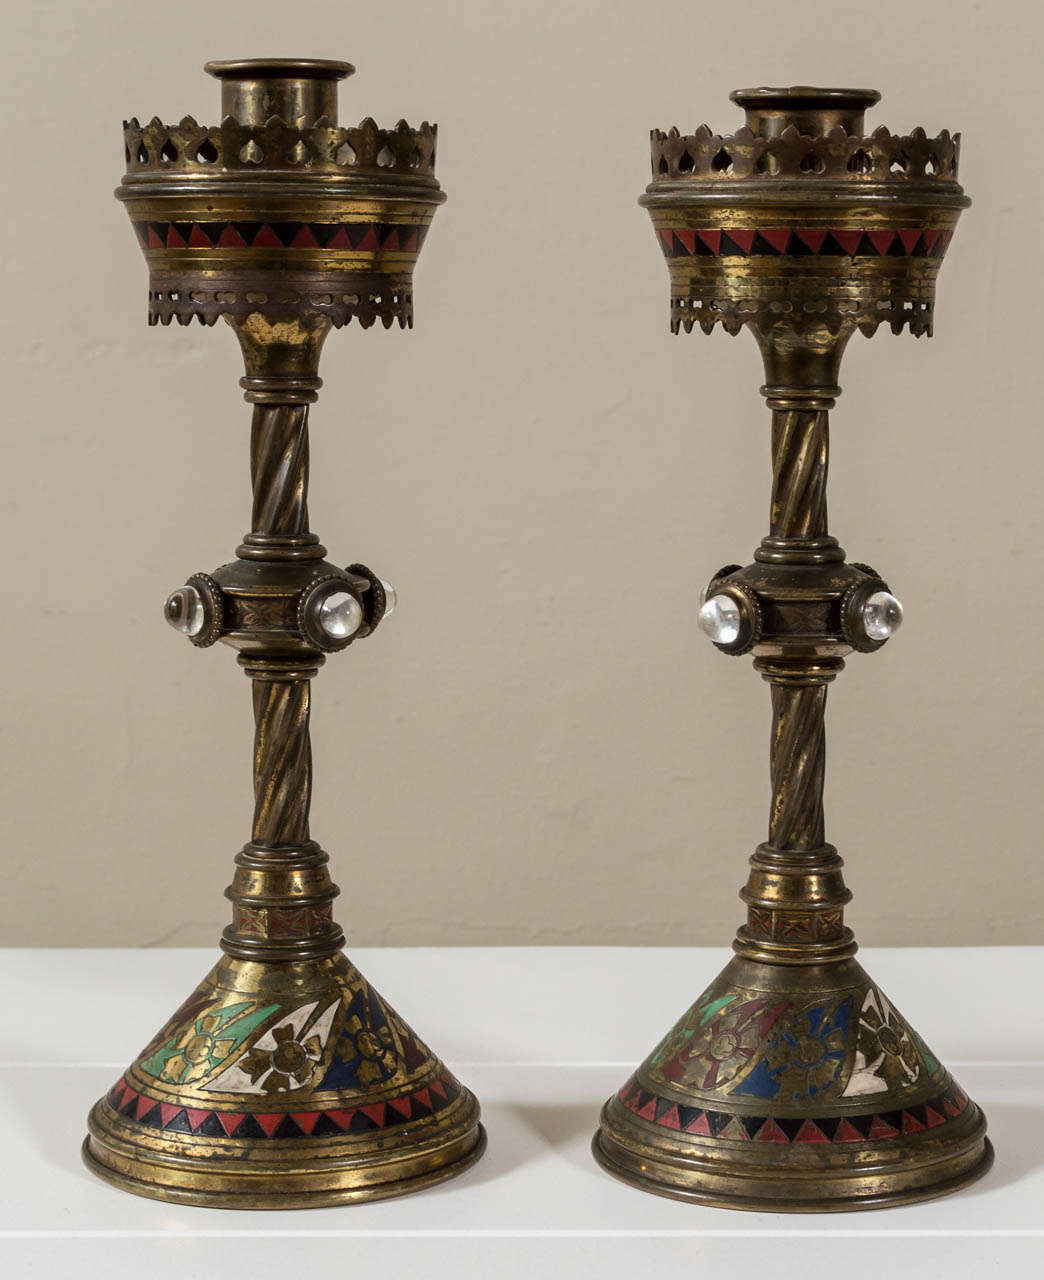 A rare and unusual pair of brass, glass and enamel candlesticks